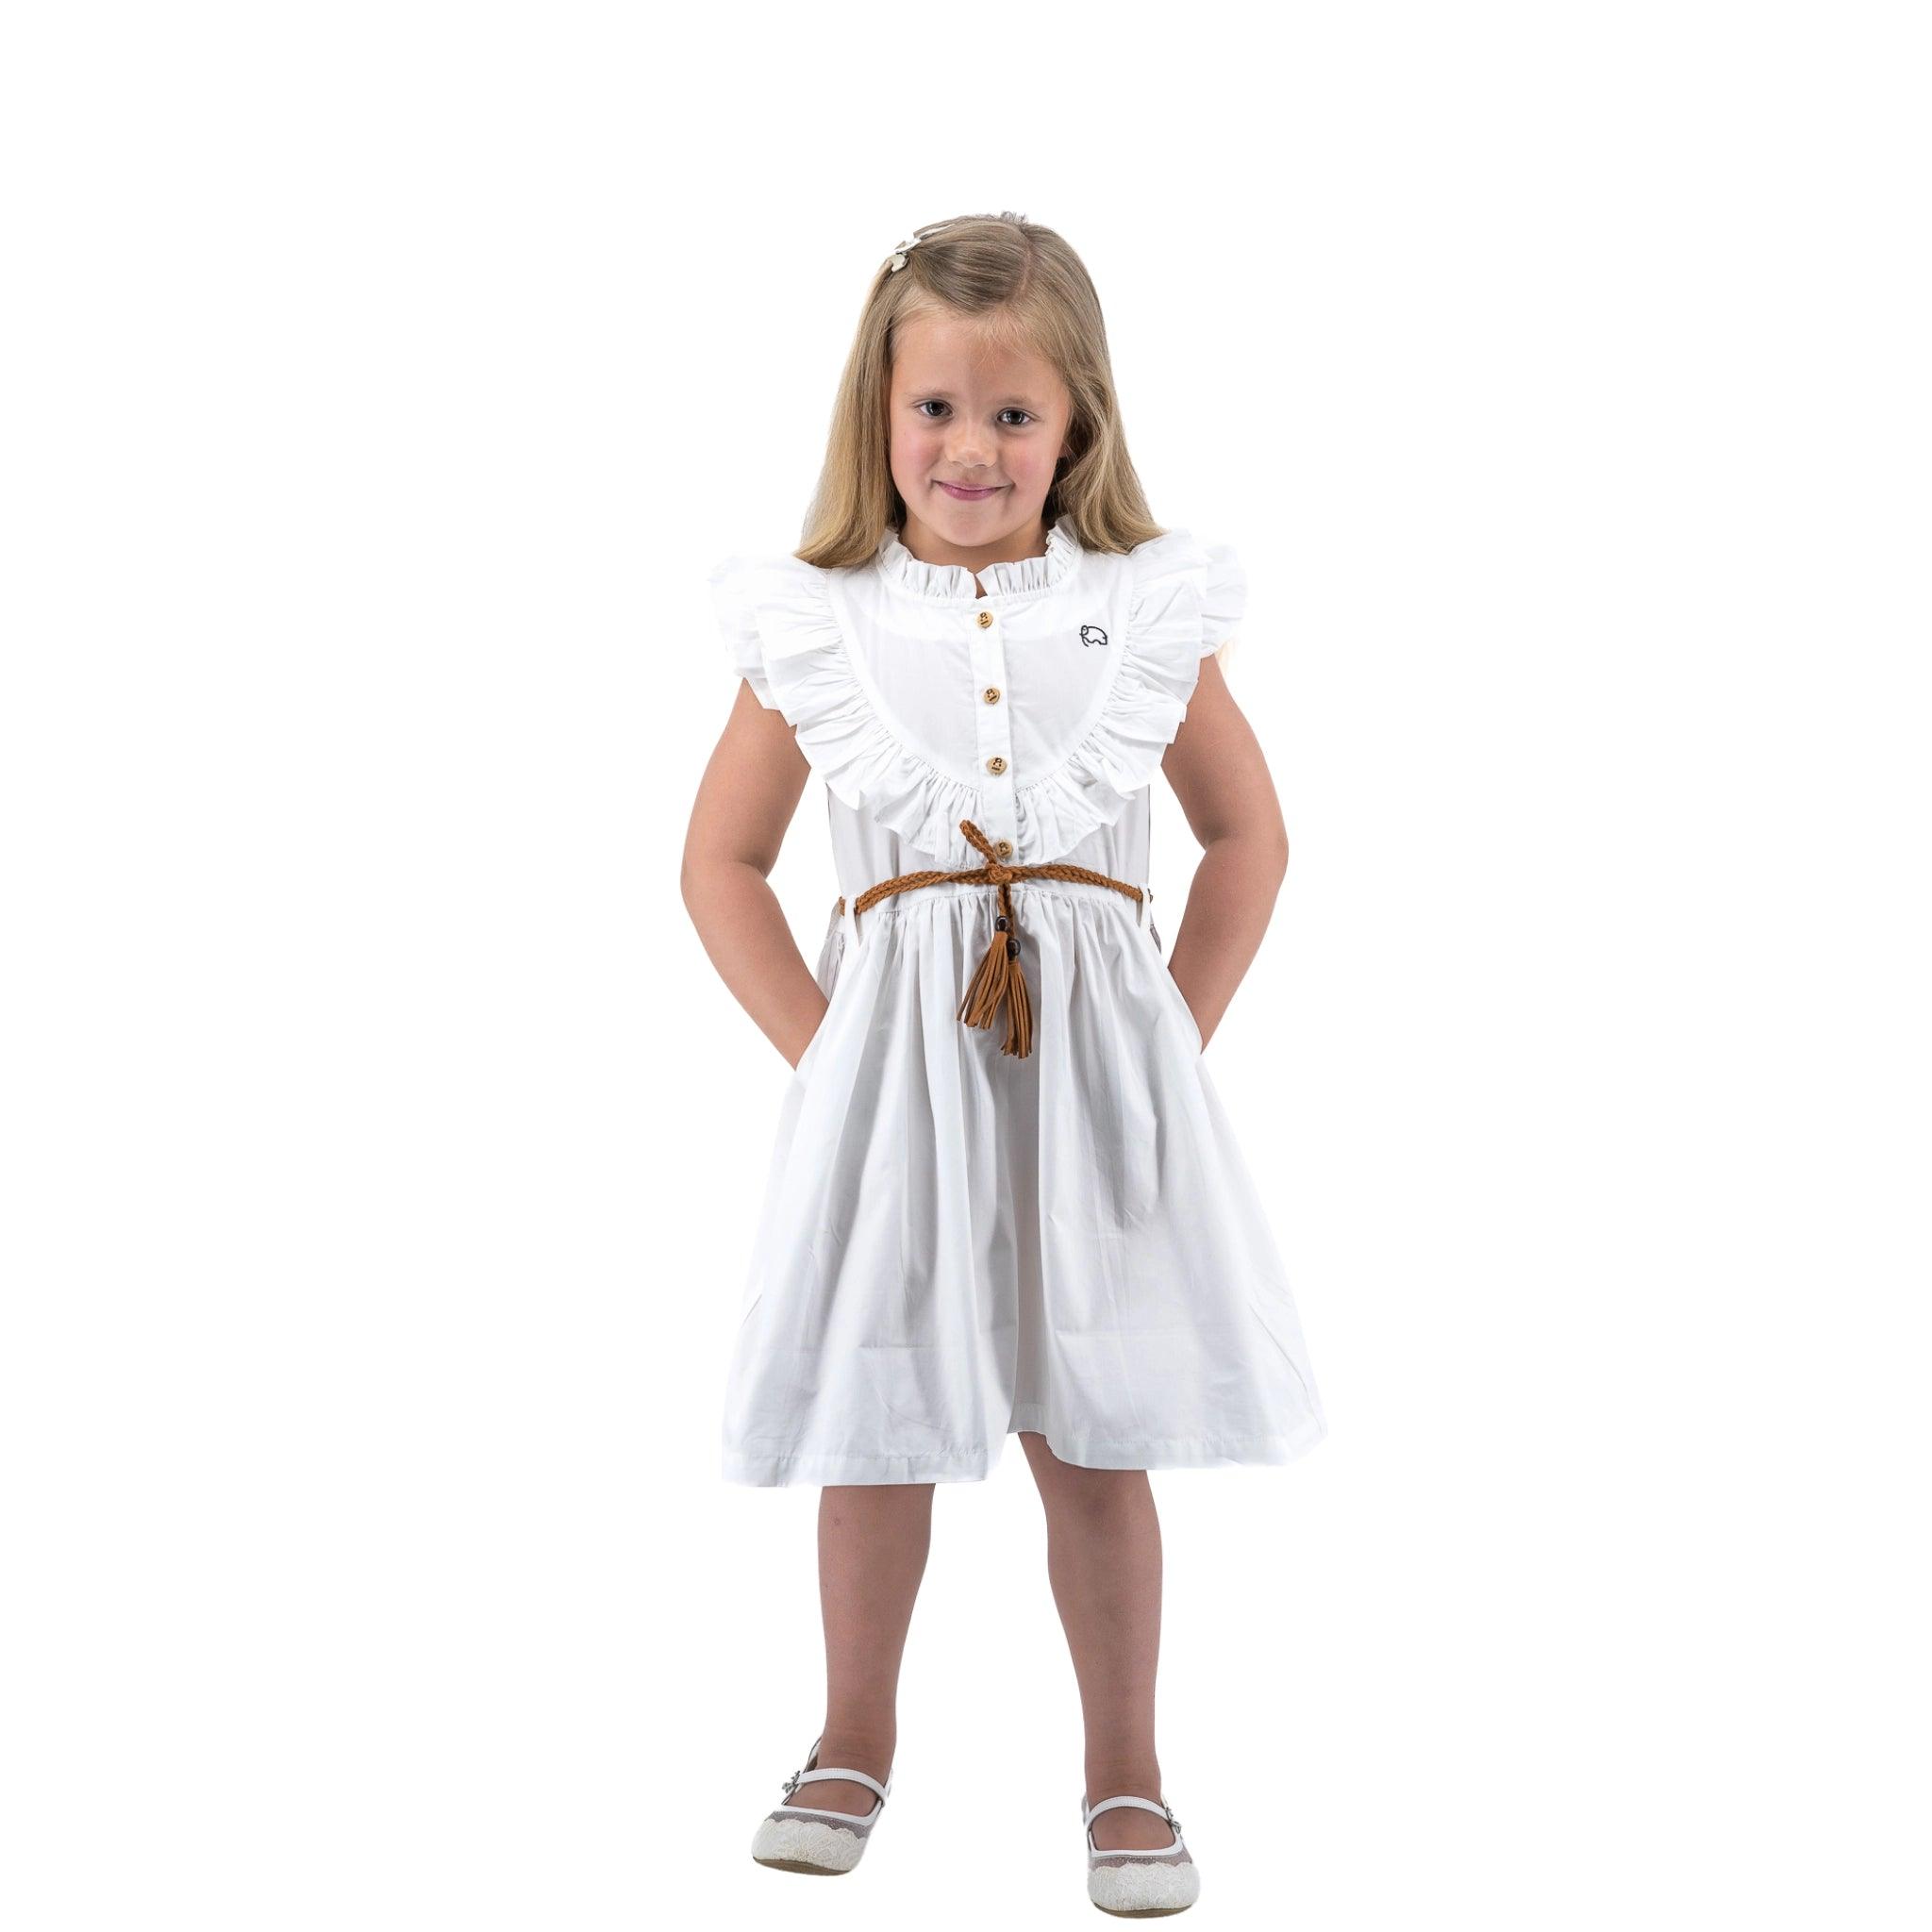 Young girl in a Karee Butterfly Sleeve Cotton Dress in White with a brown belt, smiling and posing on a white background.